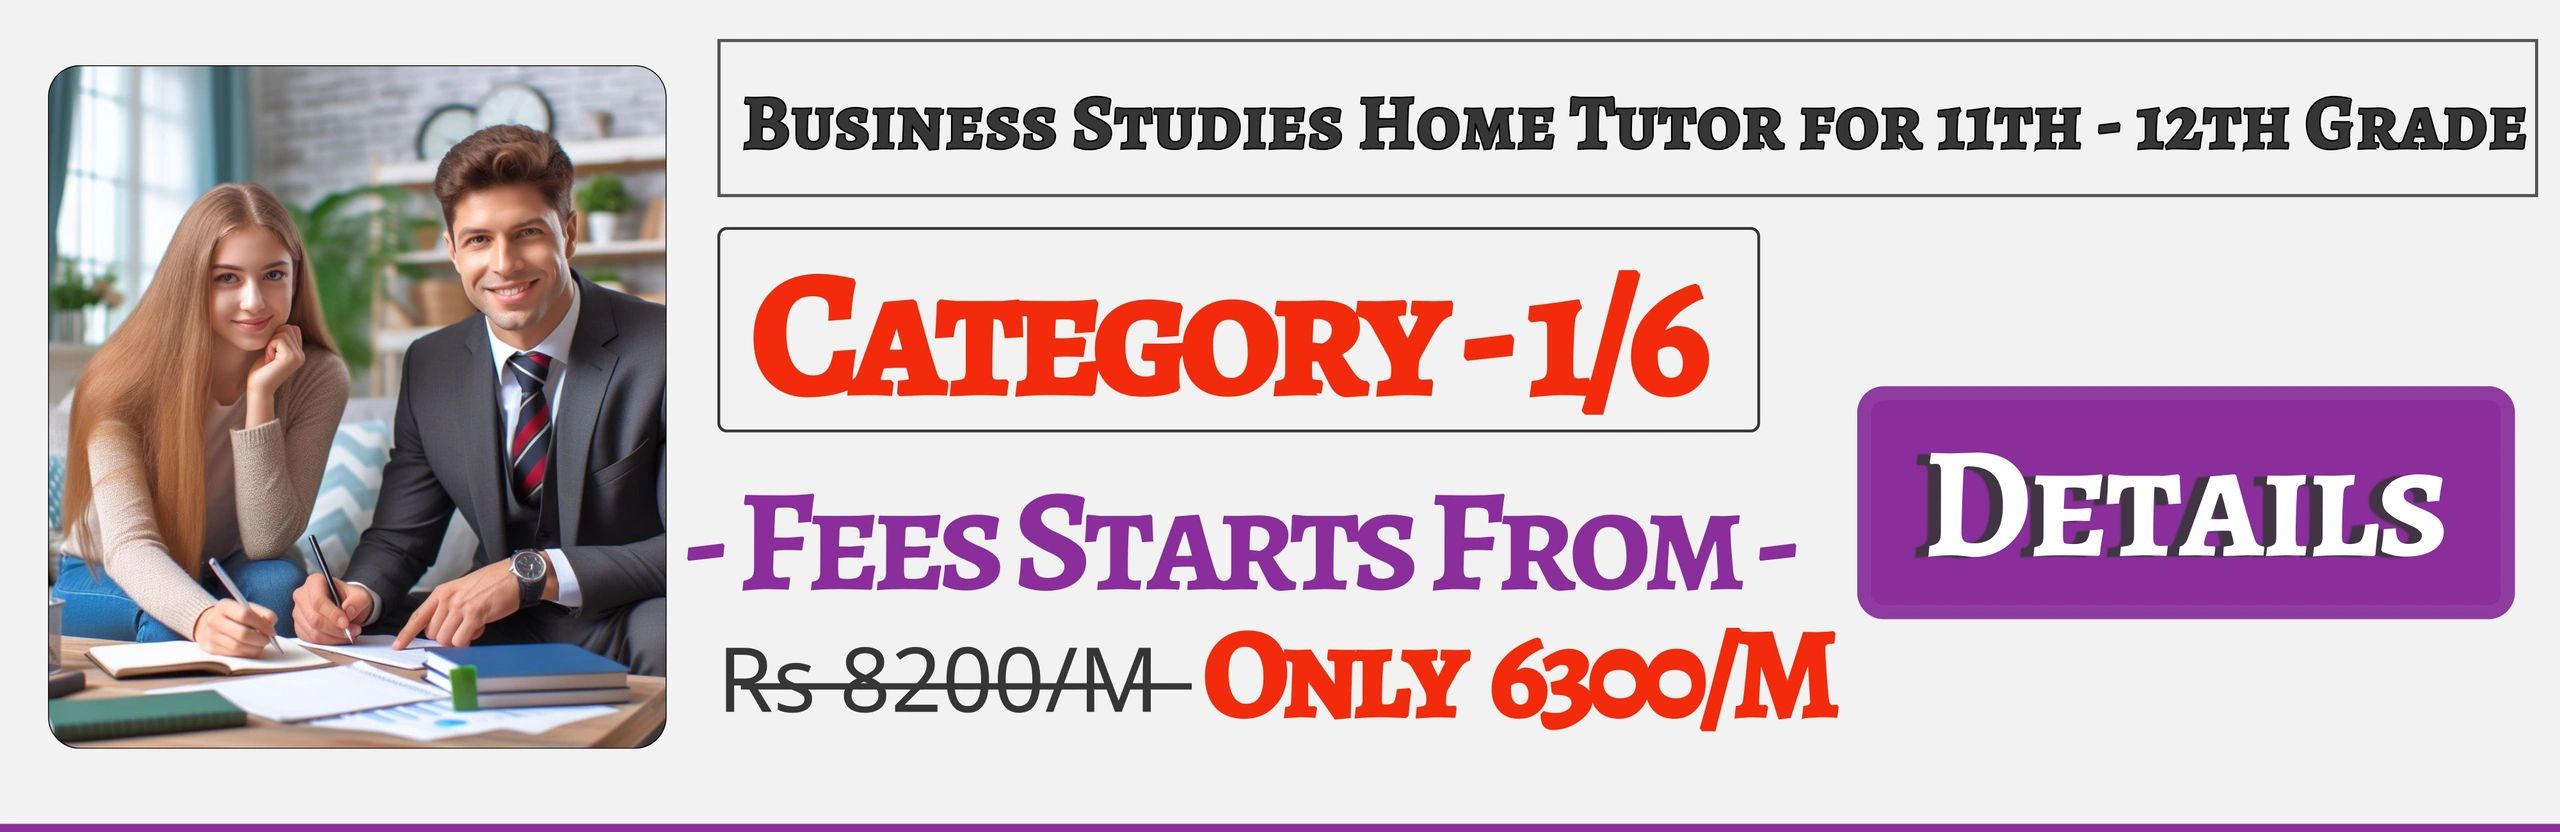 Book Best Nearby Business Studies Home Tuition Tutors For 11th & 12th Jaipur ,Fees Only 6300/M